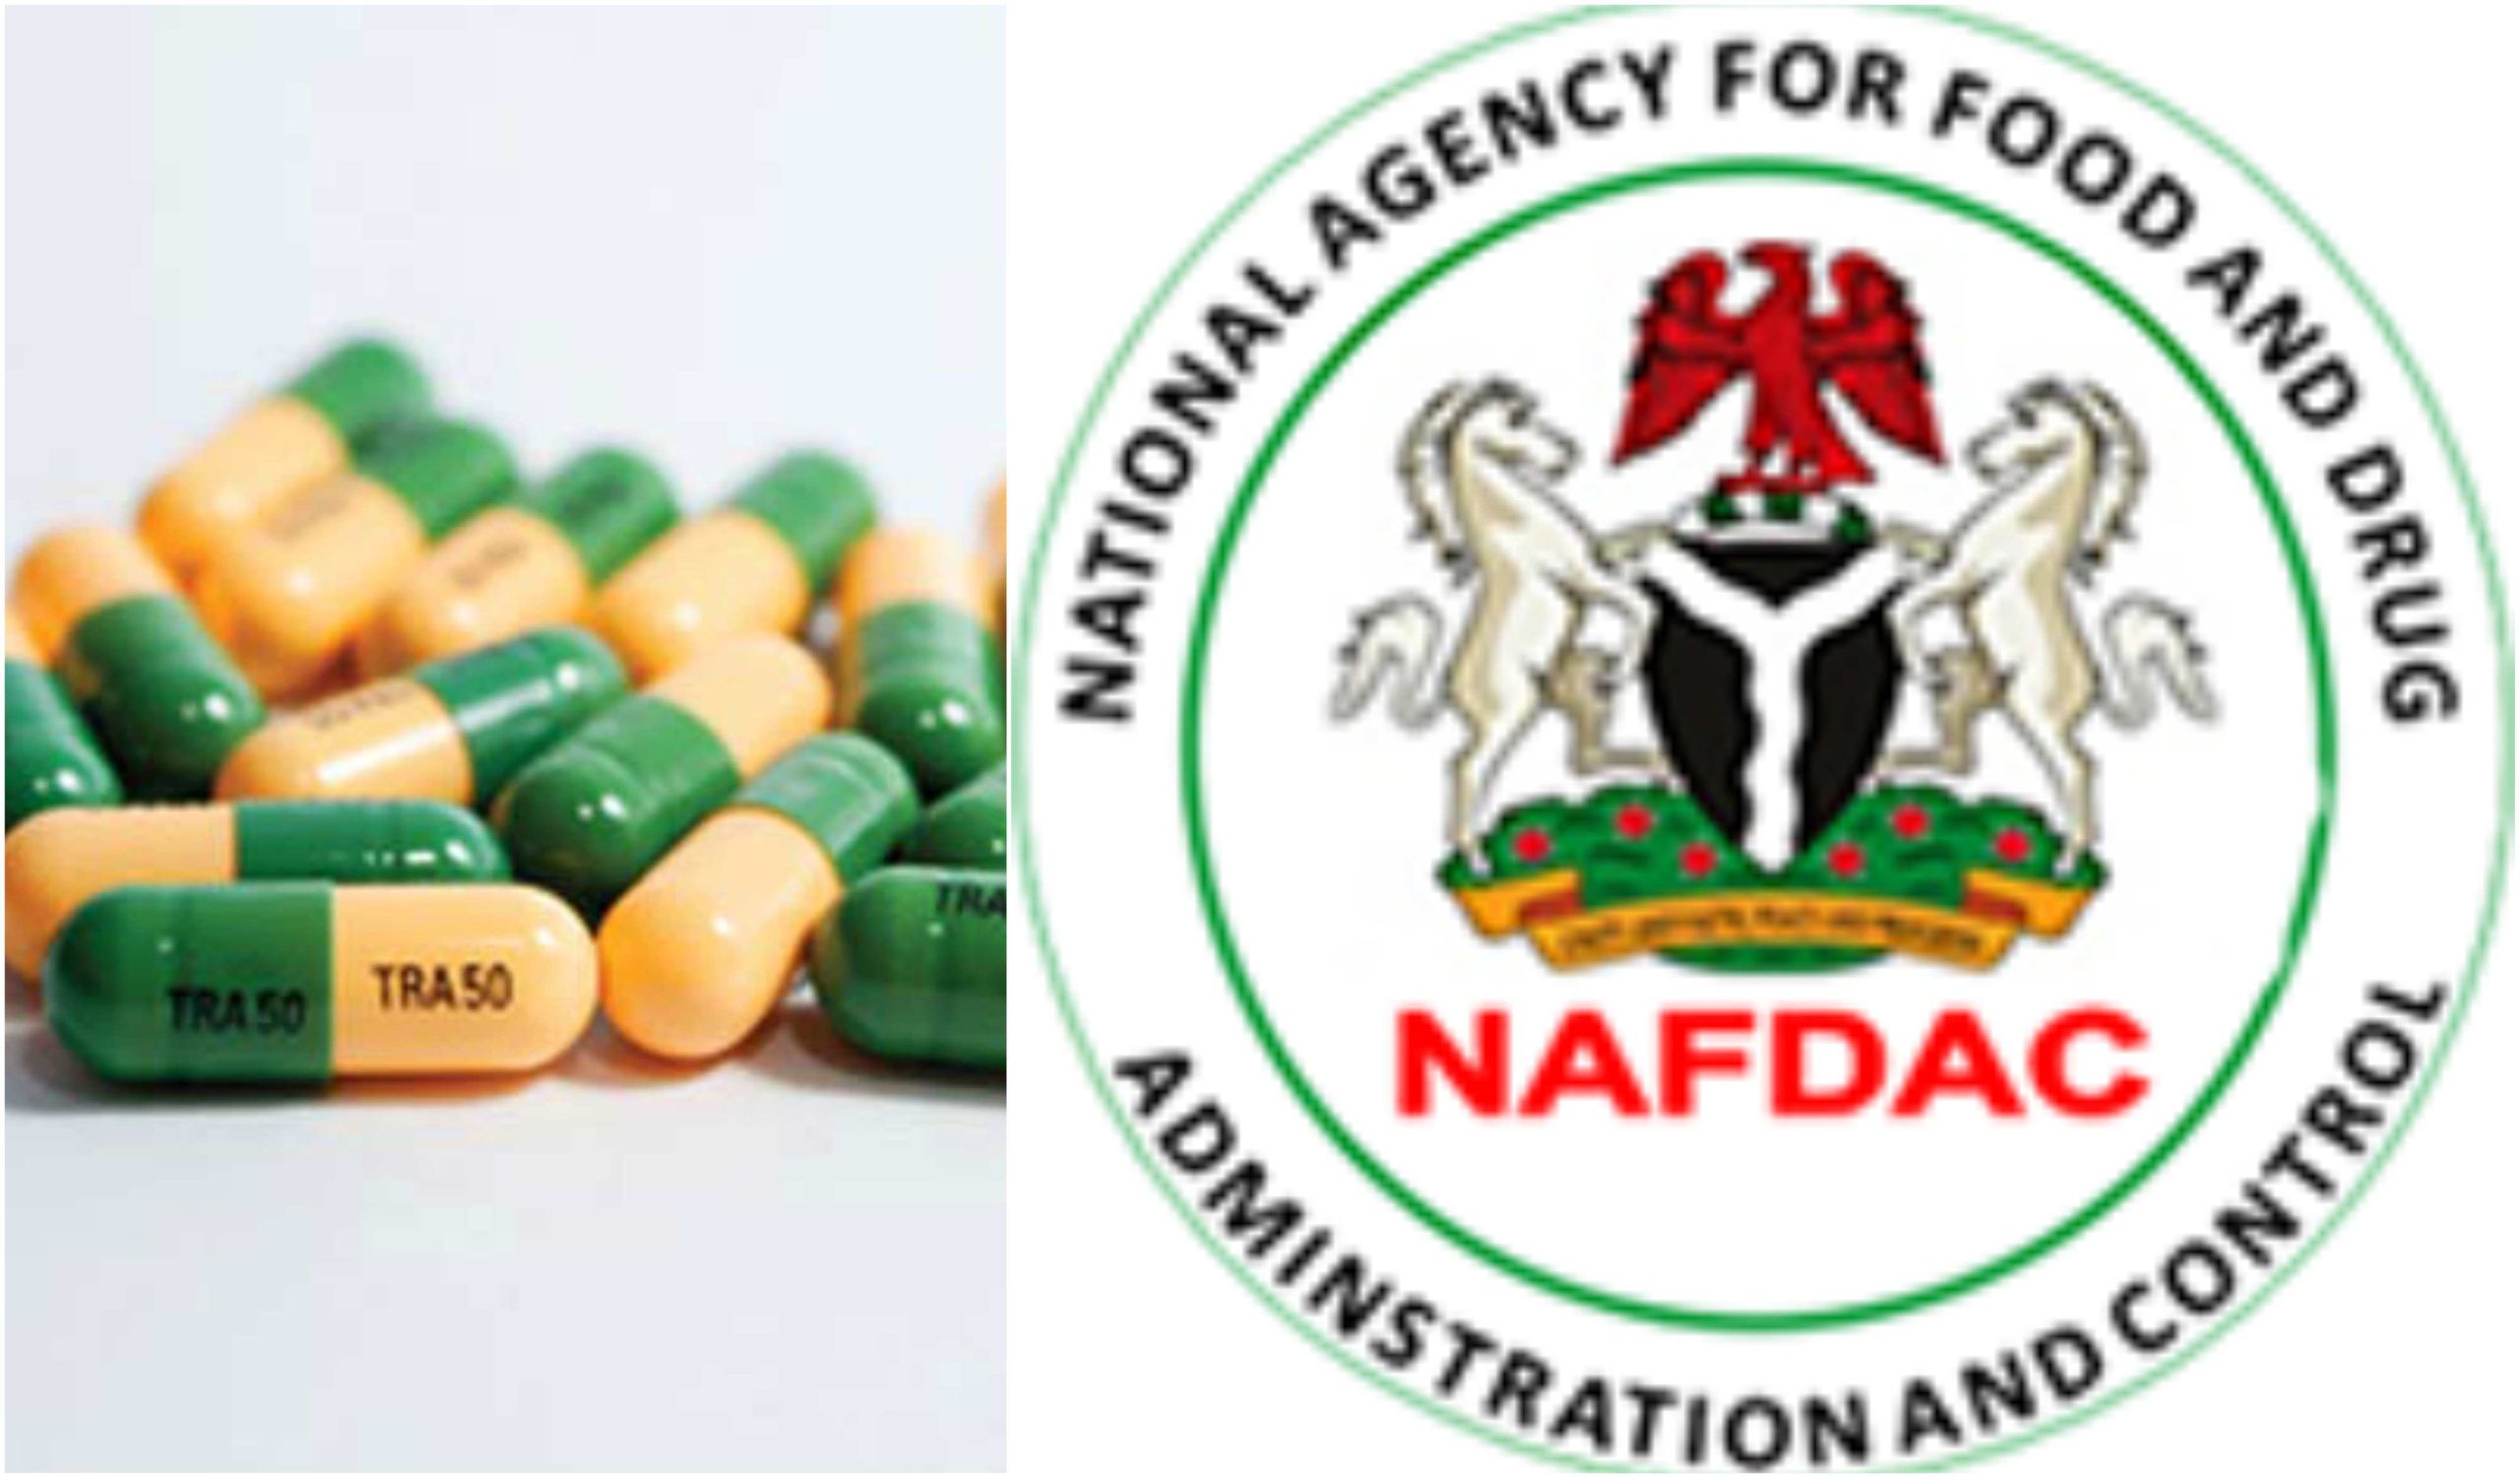 35 containers of Tramadol seized by NAFDAC